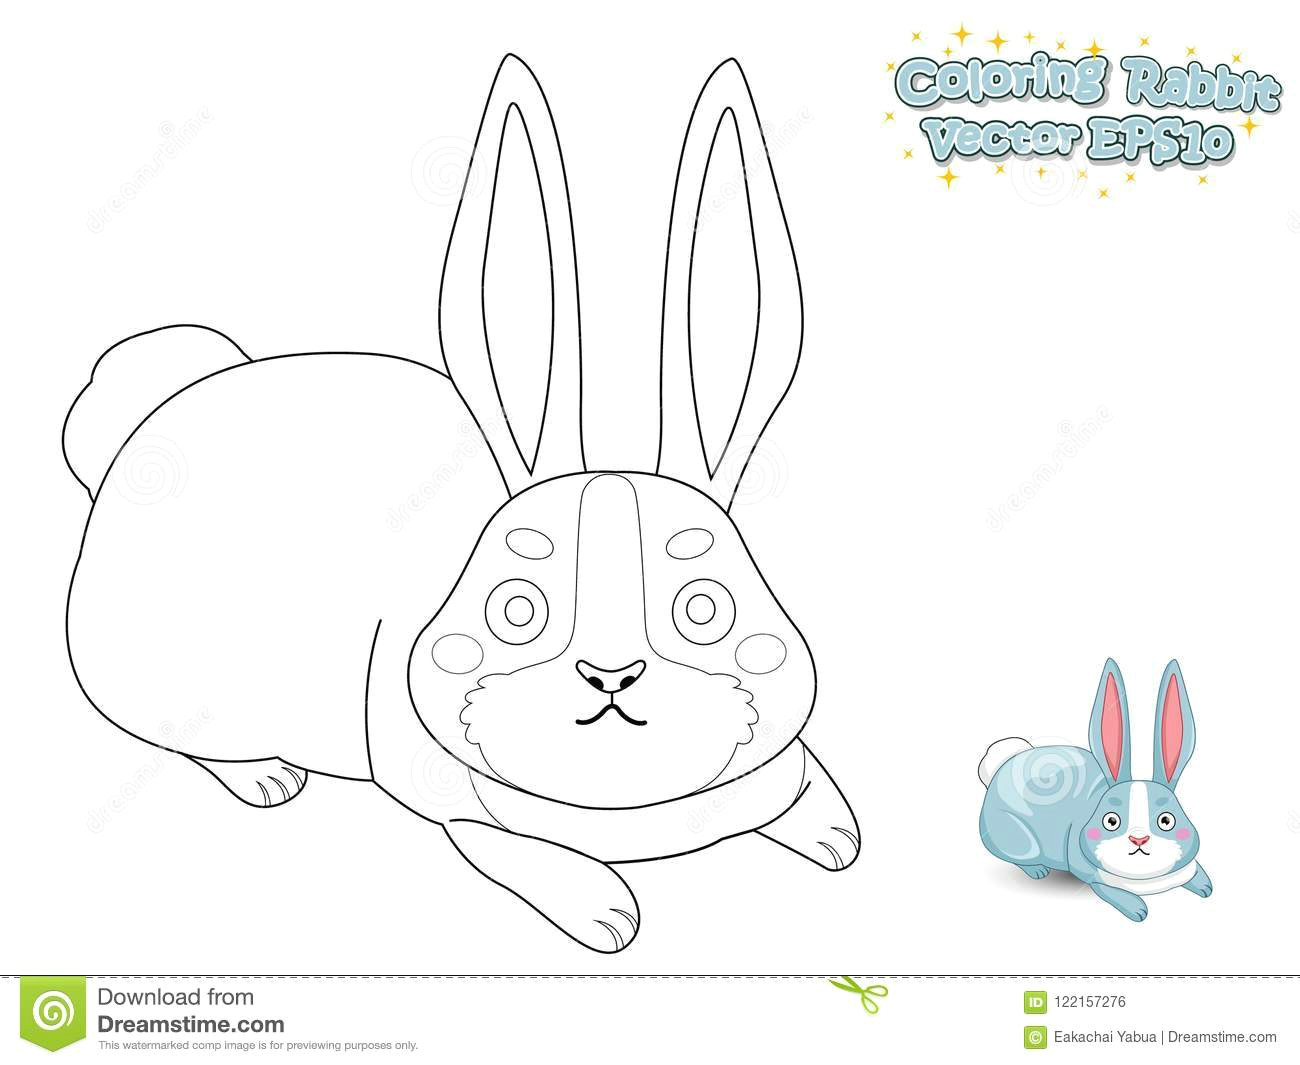 coloring the cute cartoon rabbit educational game for kids vector illustration